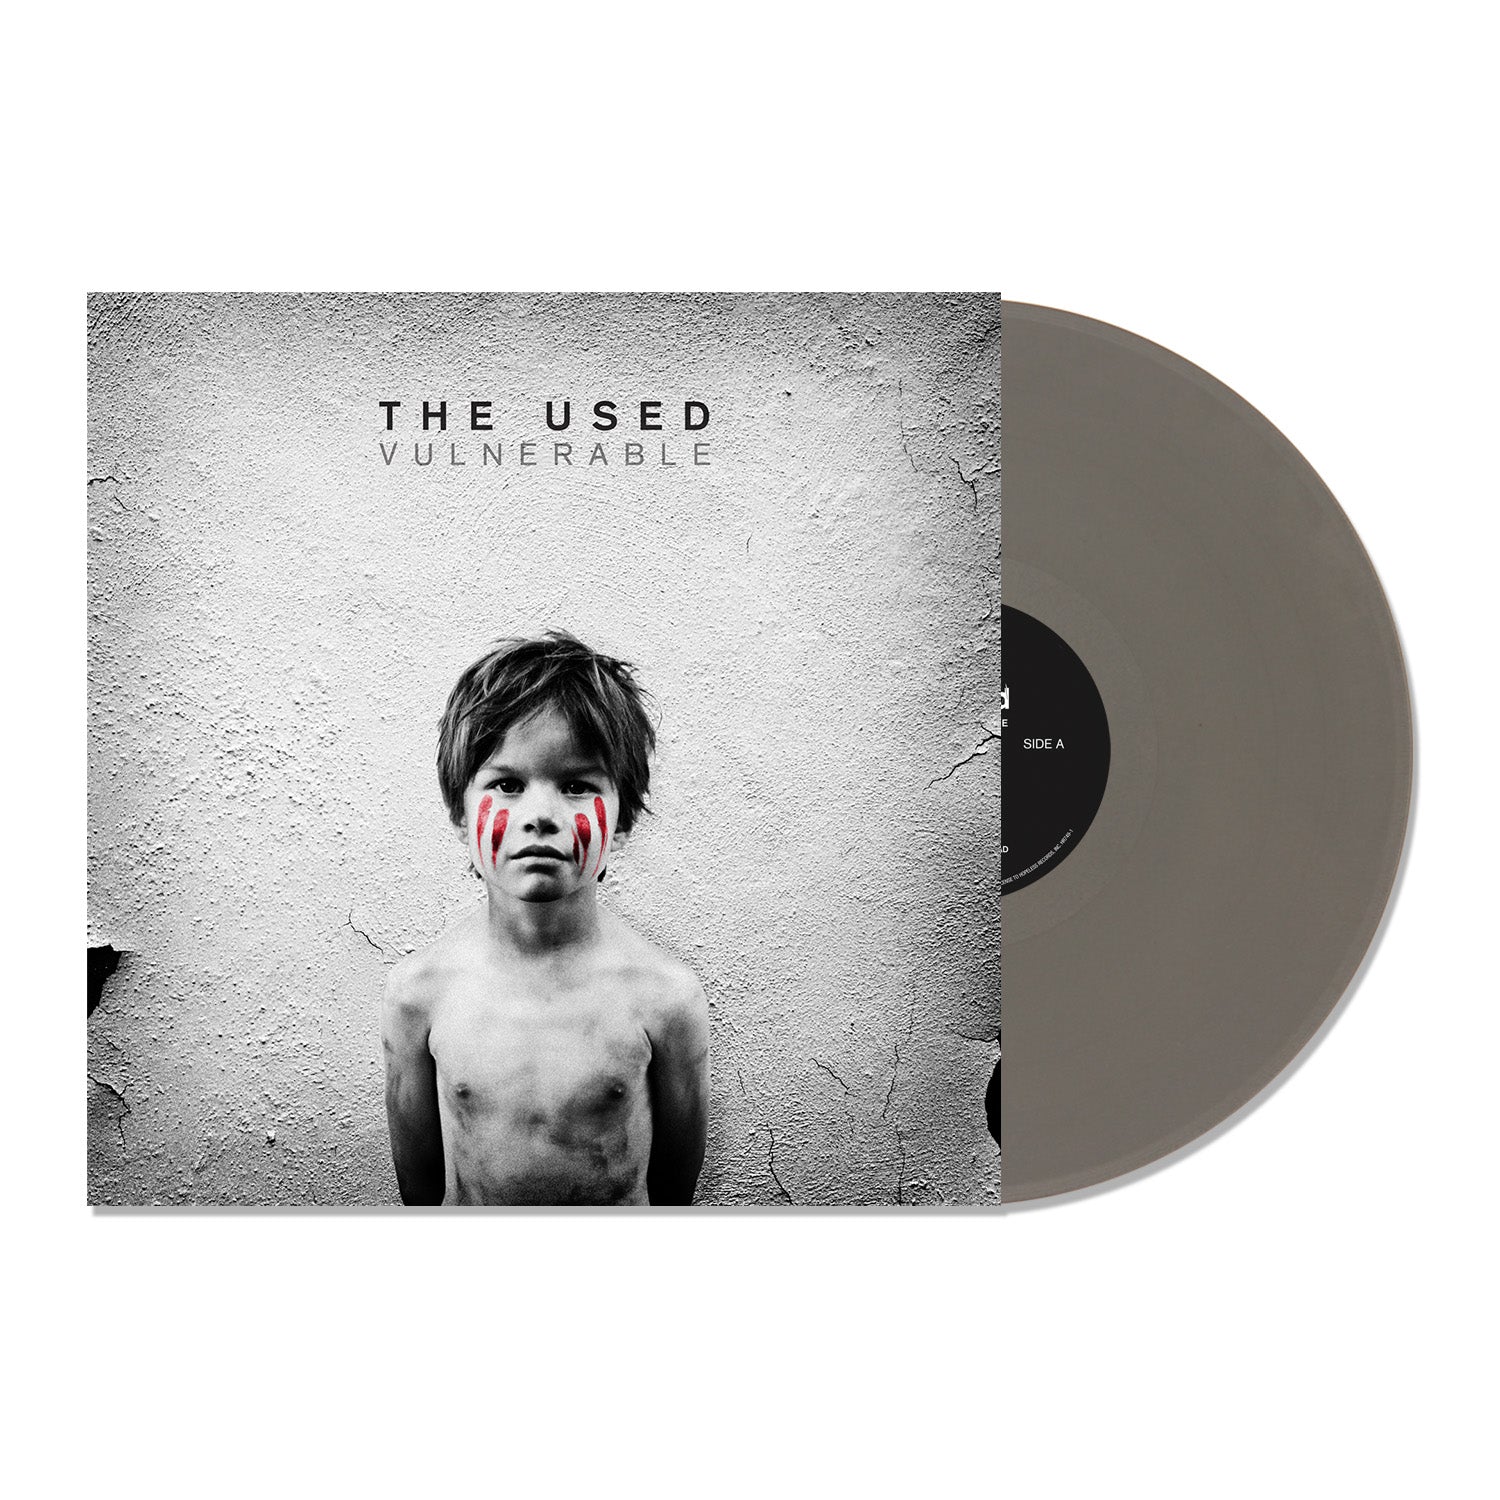 The Used - Vulnerable: Silver Vinyl LP